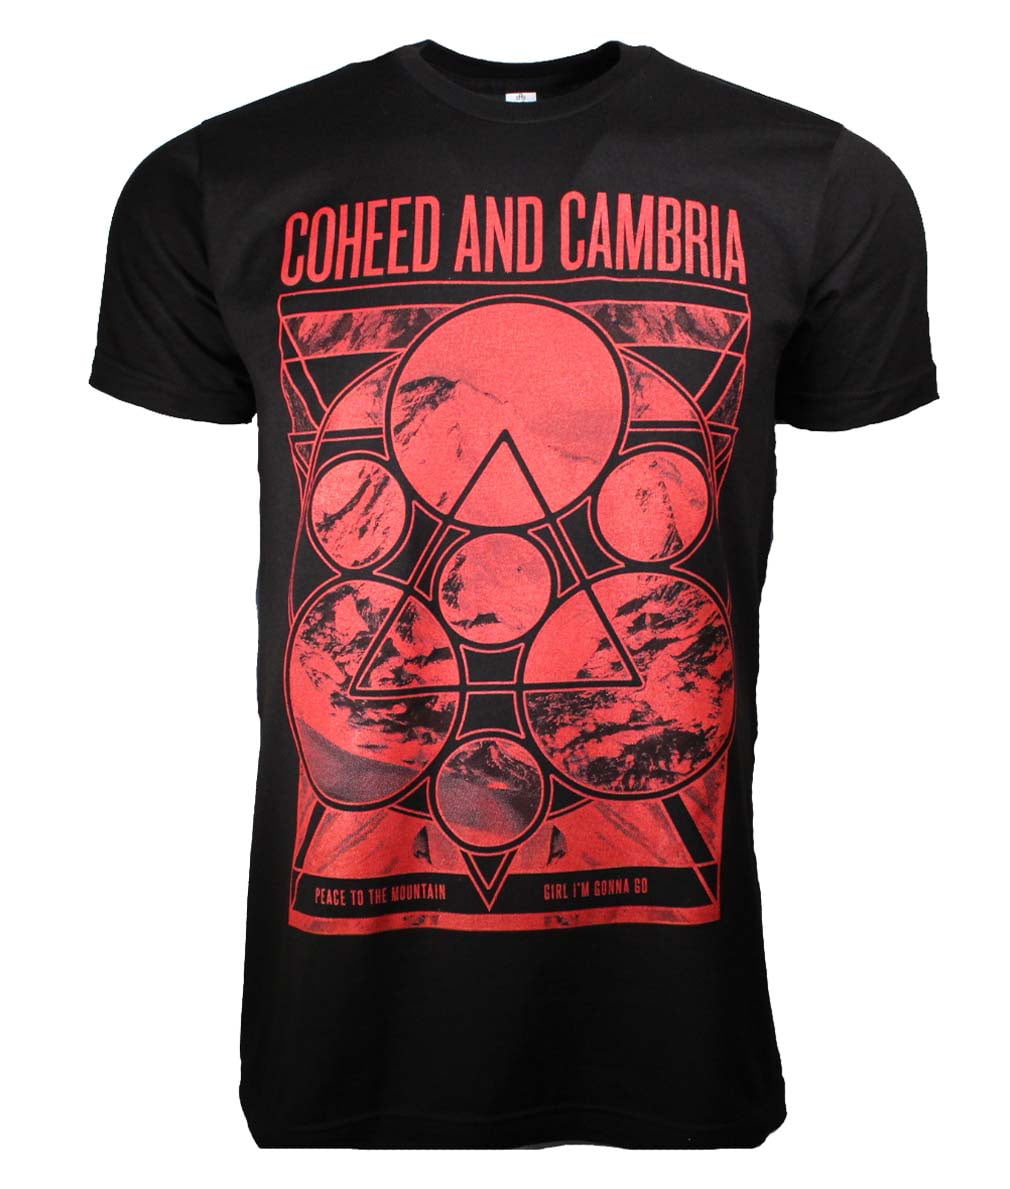 NOT Men Coheed and Cambria Trend Tee